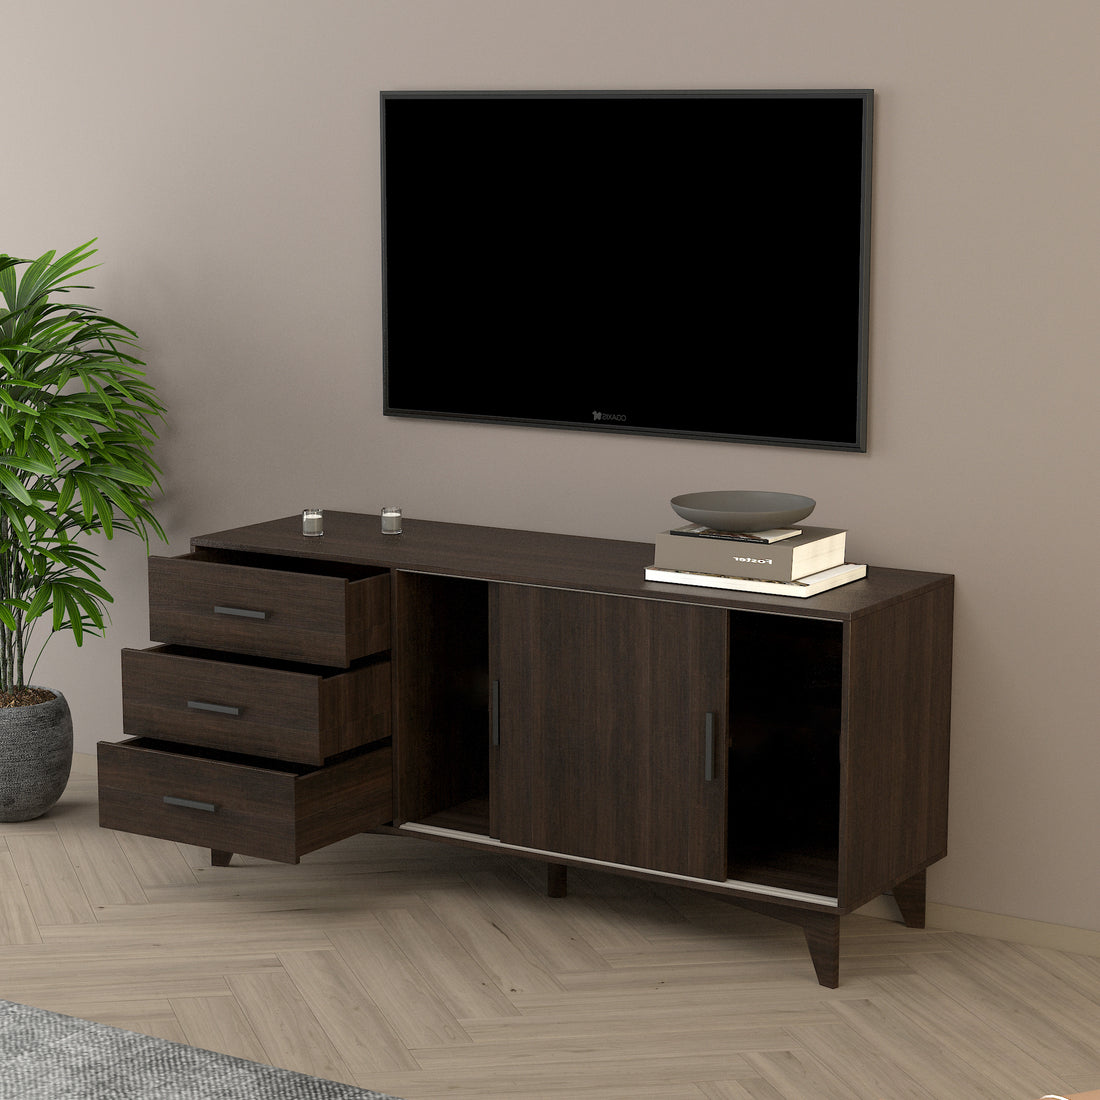 Parker Tv Stand with Sliding Doors and Drawers in